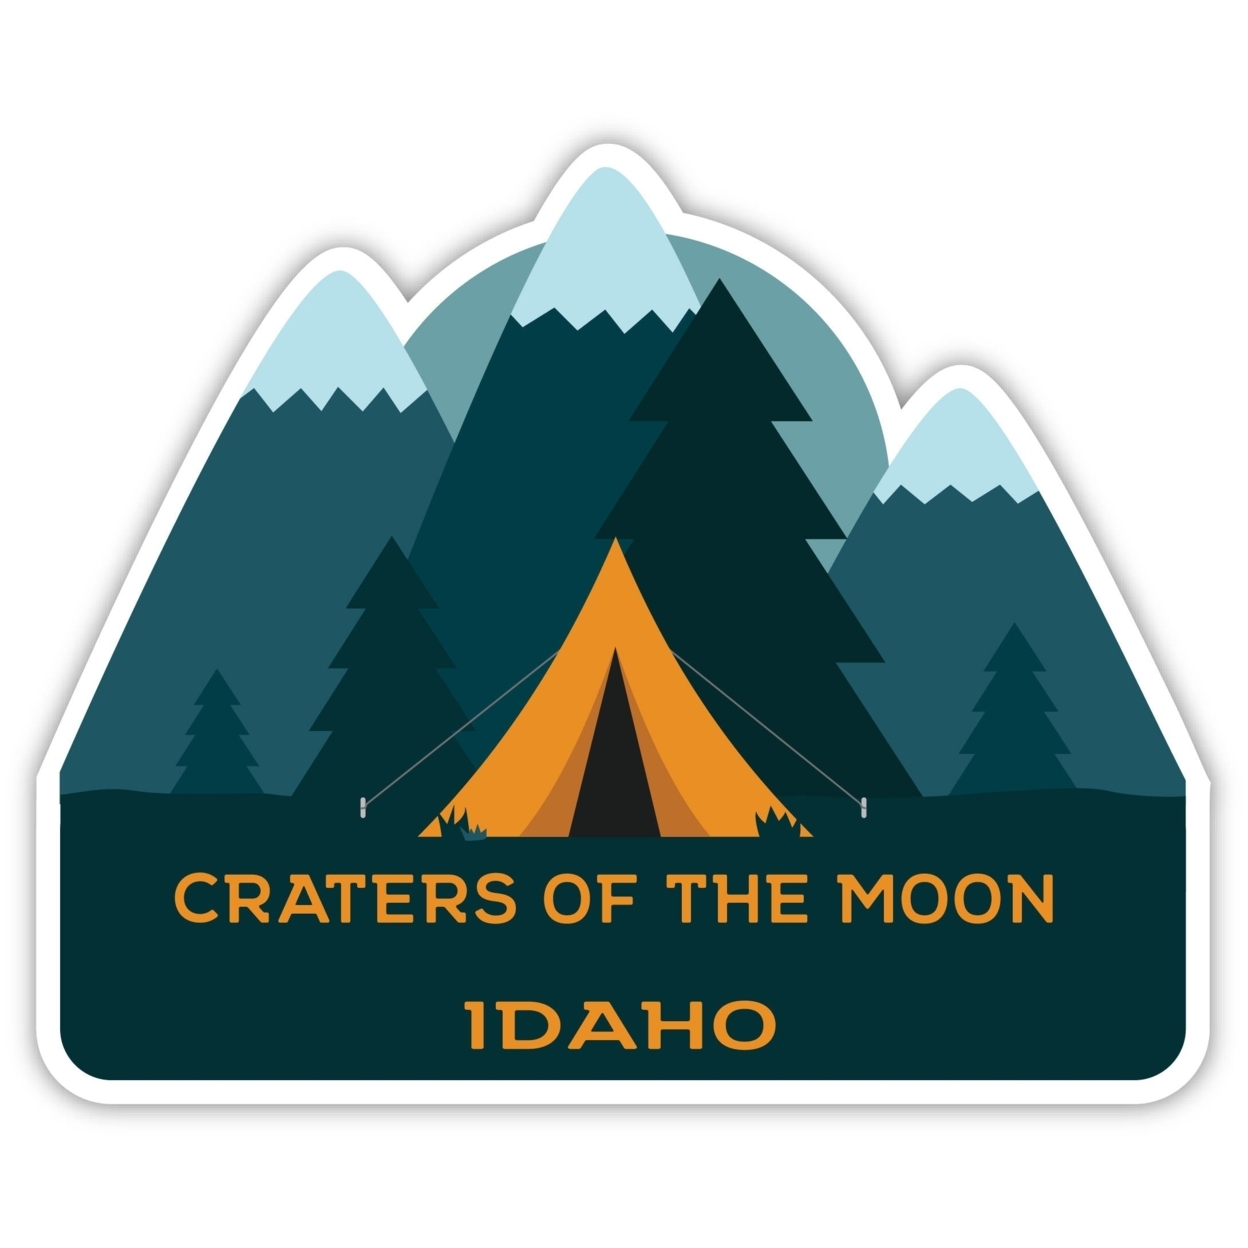 Craters Of The Moon Idaho Souvenir Decorative Stickers (Choose Theme And Size) - Single Unit, 6-Inch, Tent